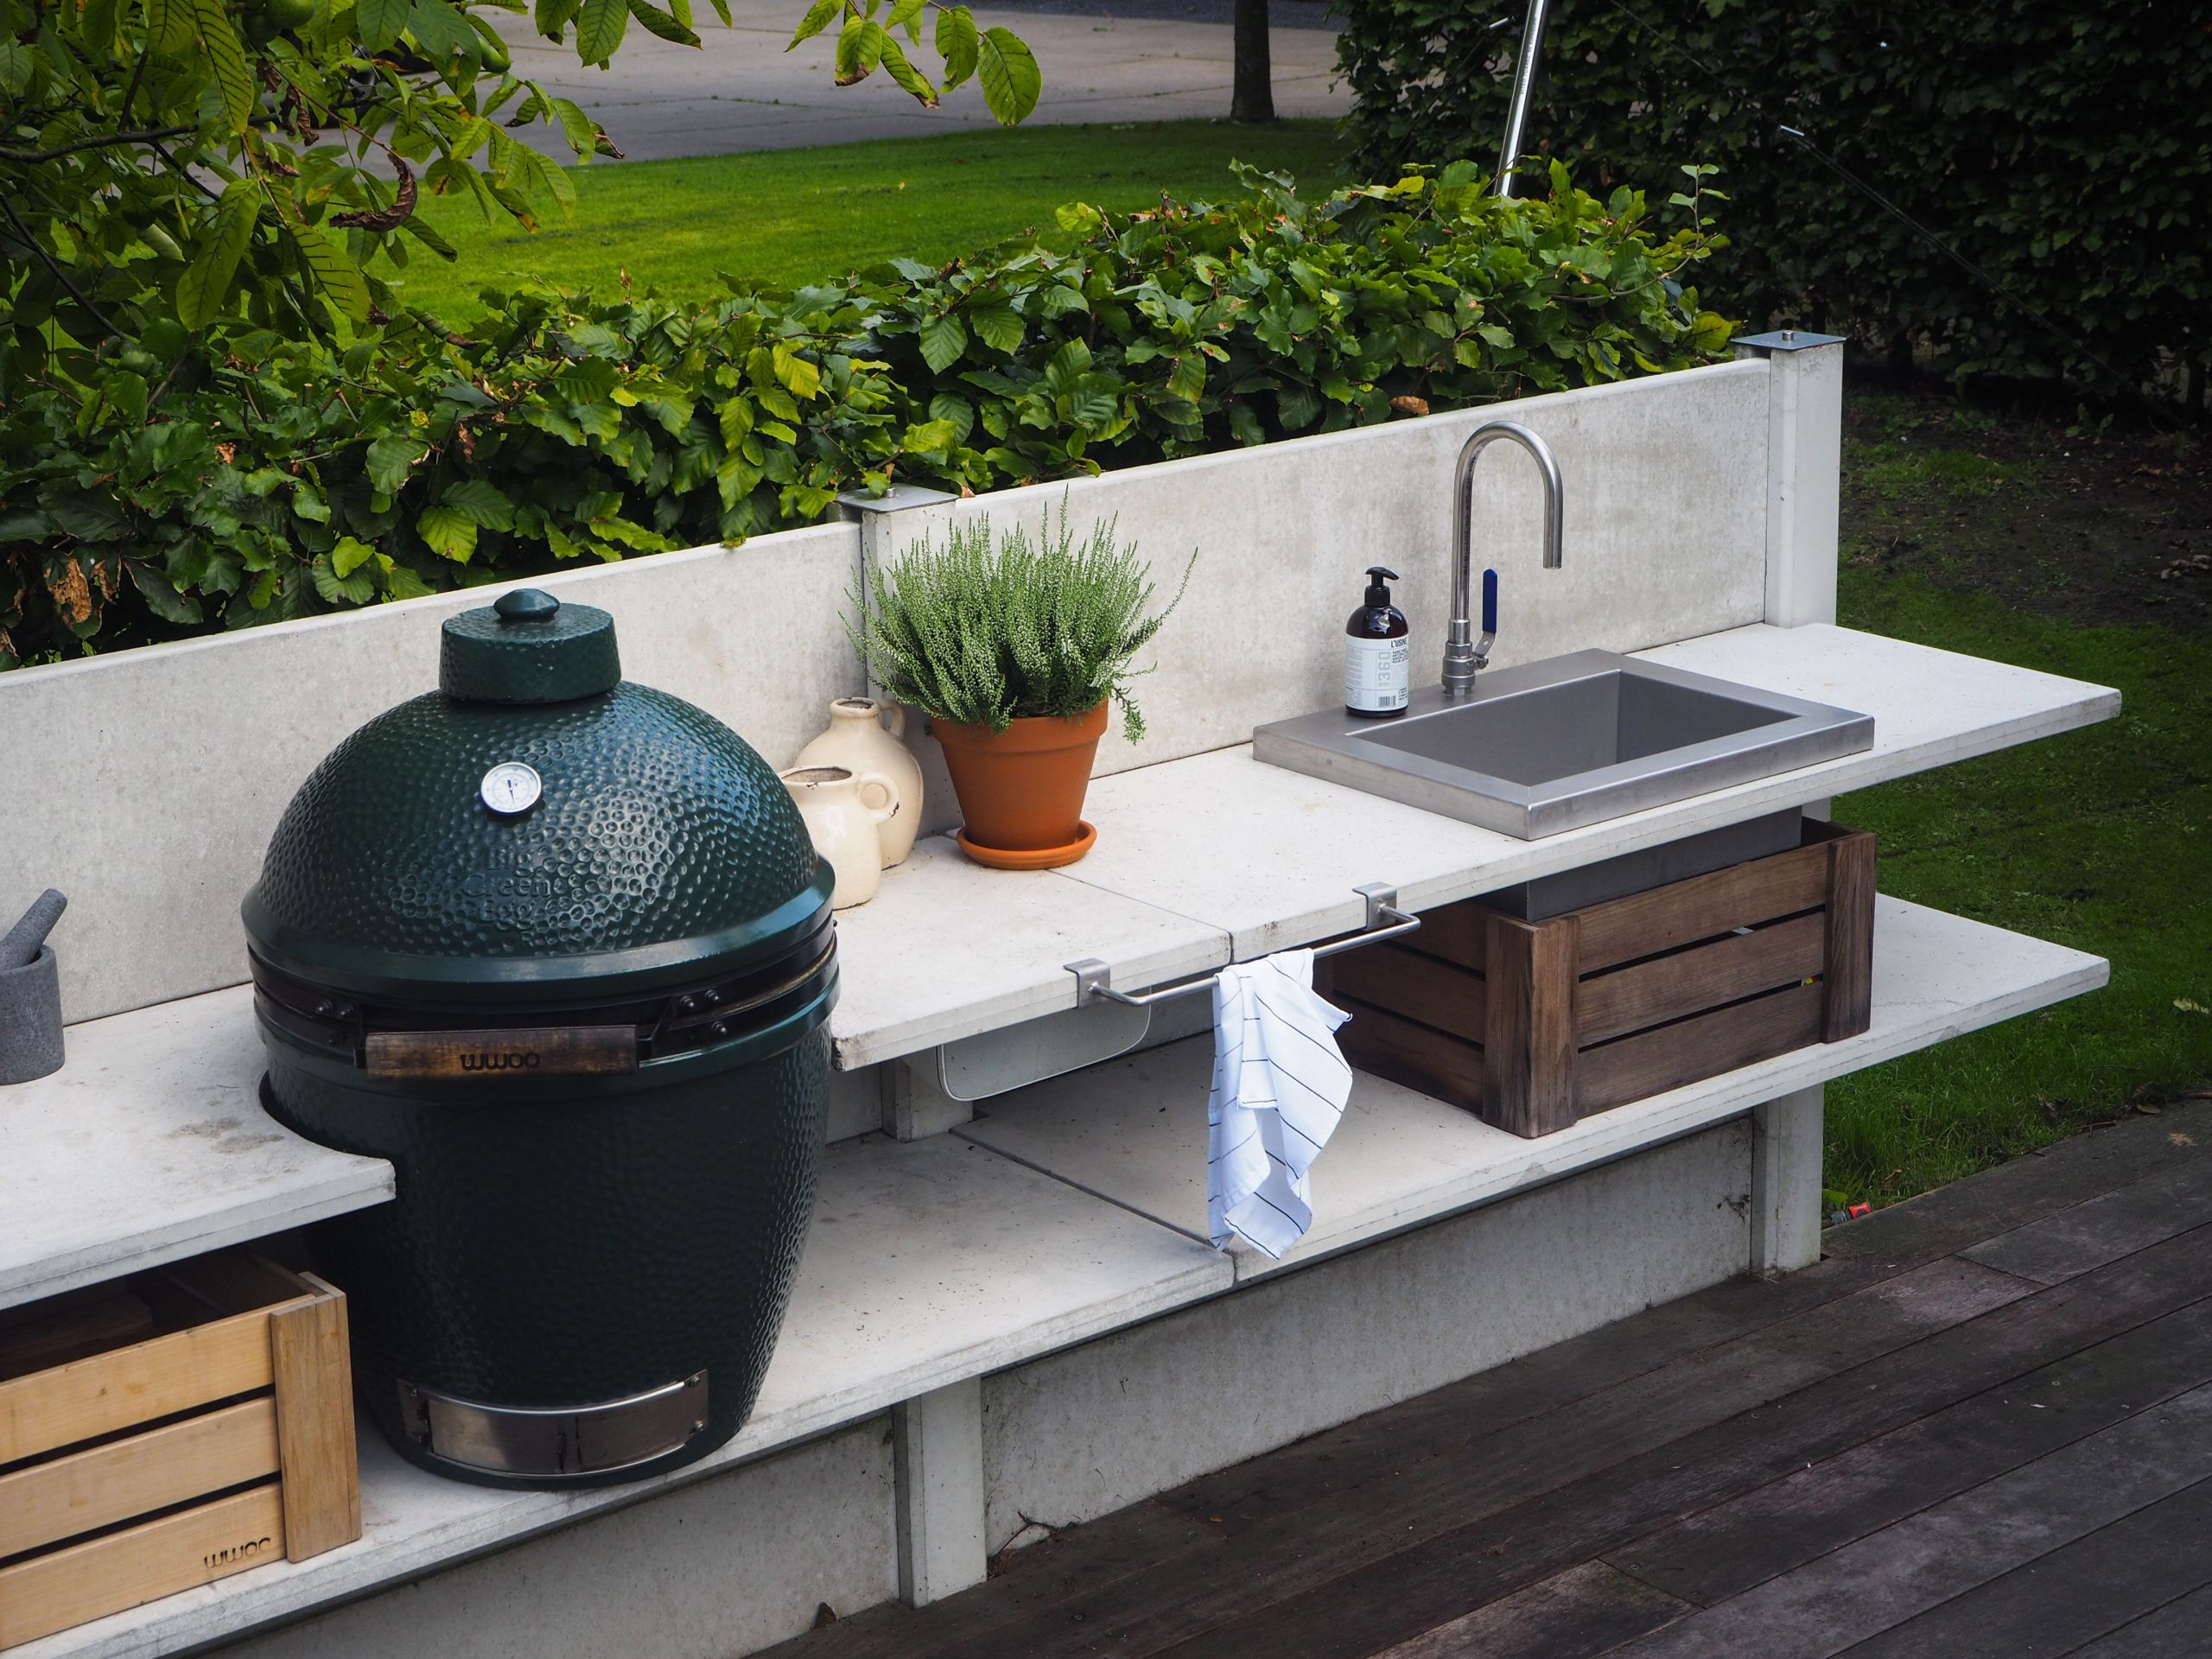 Outdoor Kitchen With Green Egg
 WWOO outdoor kitchen light grey with the Big Green Egg